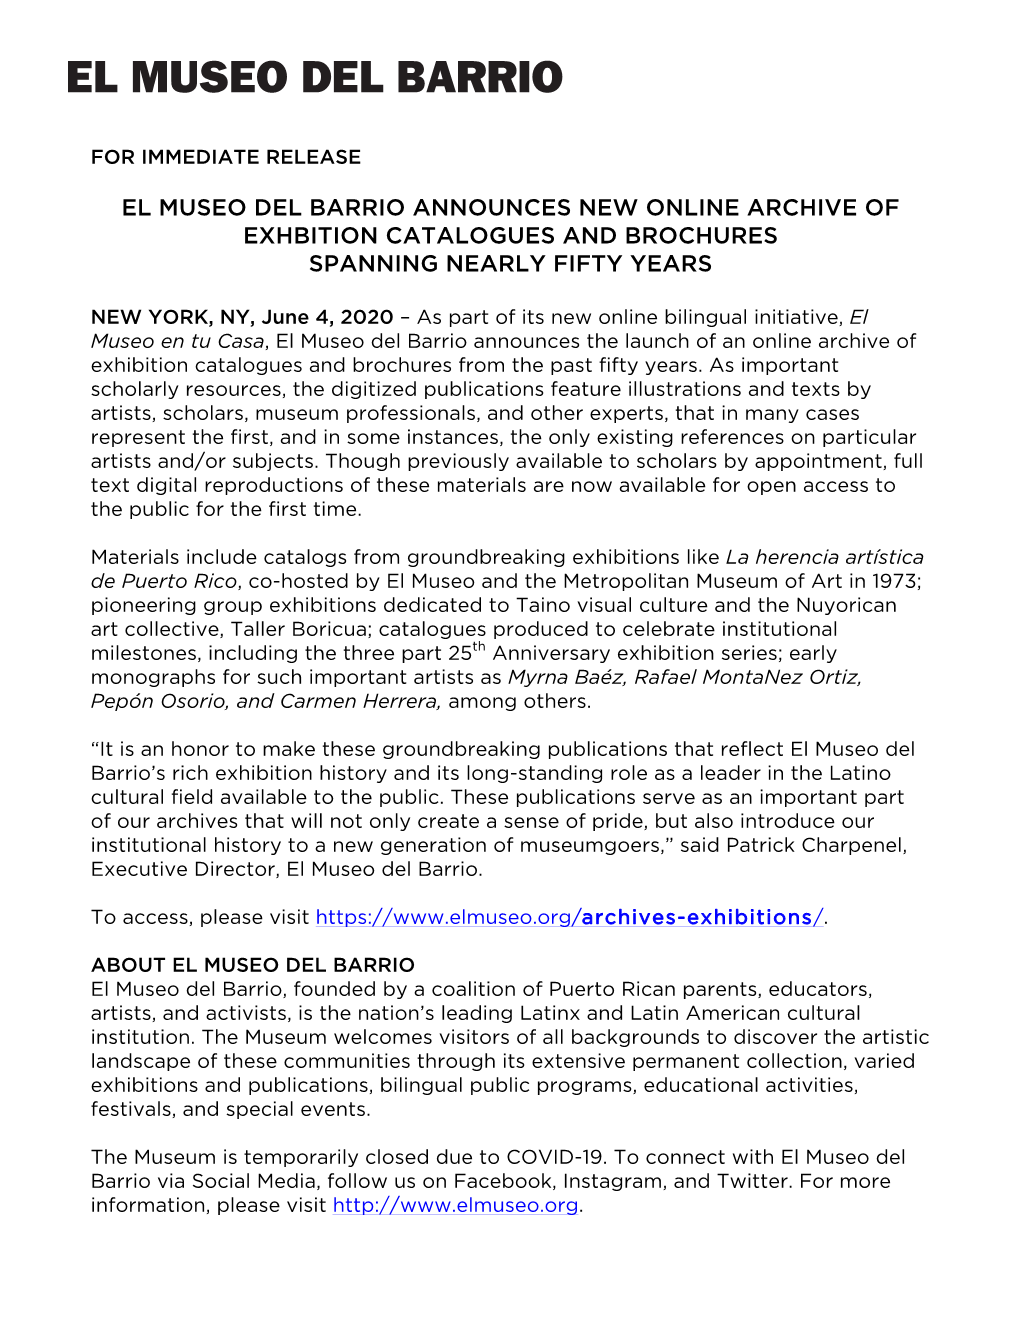 El Museo Del Barrio Announces New Online Archive of Exhbition Catalogues and Brochures Spanning Nearly Fifty Years